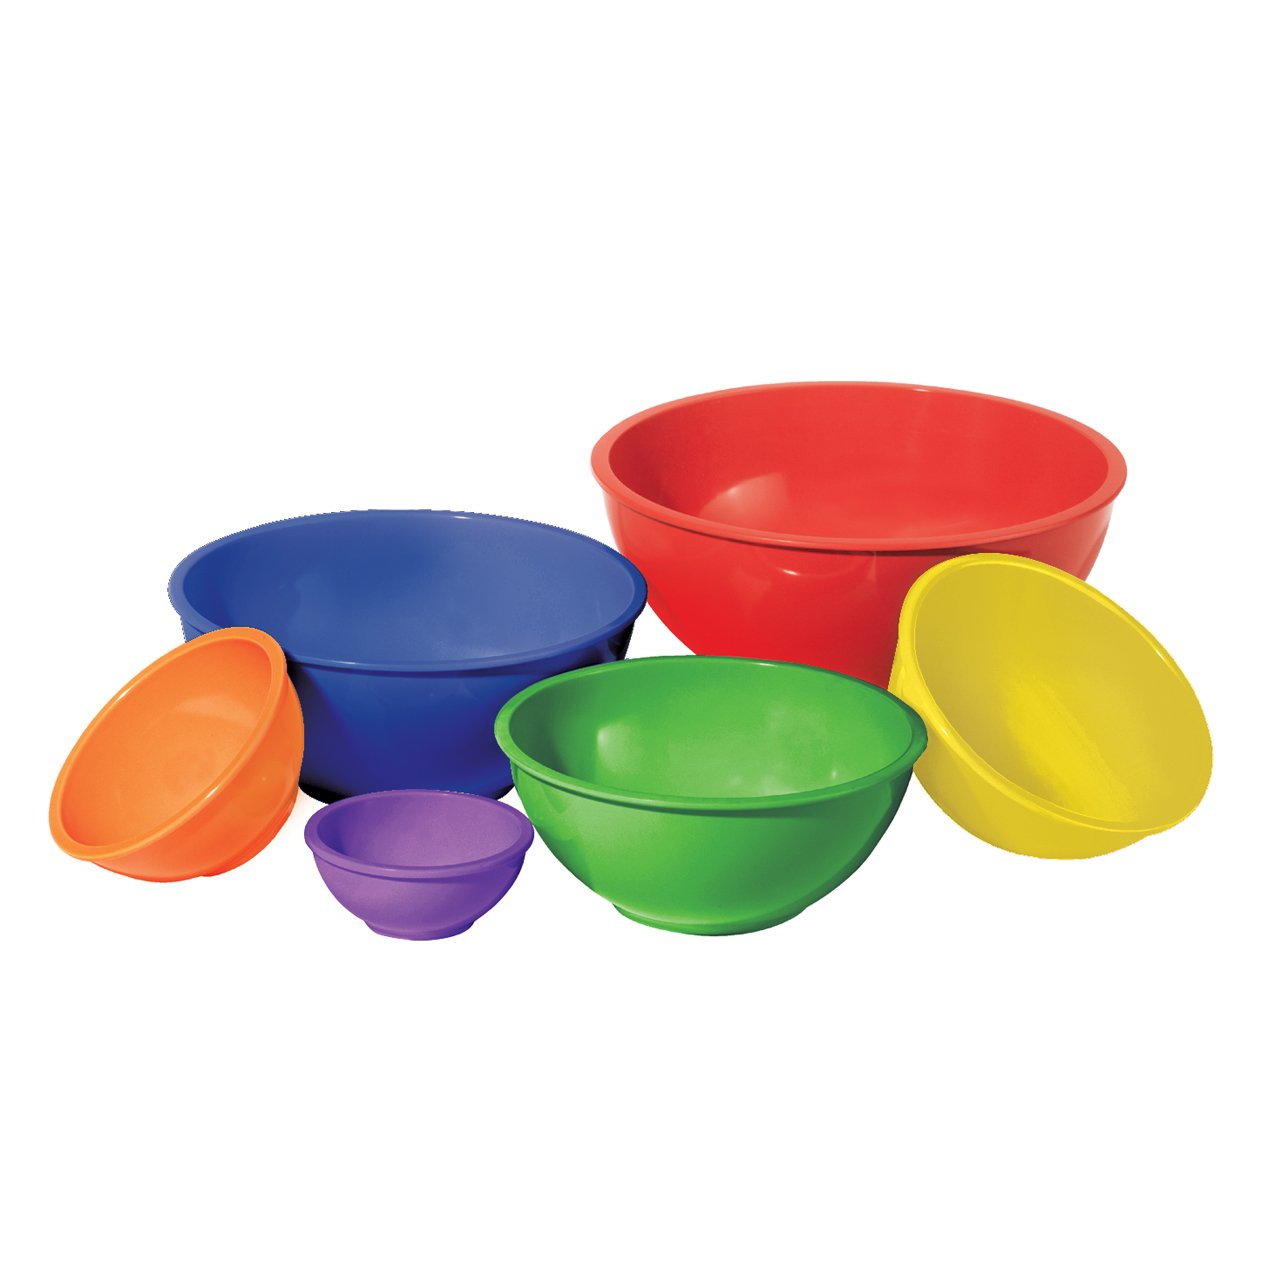 Hot sell Melamine Salad bowl set of 6 pc with plastic lid